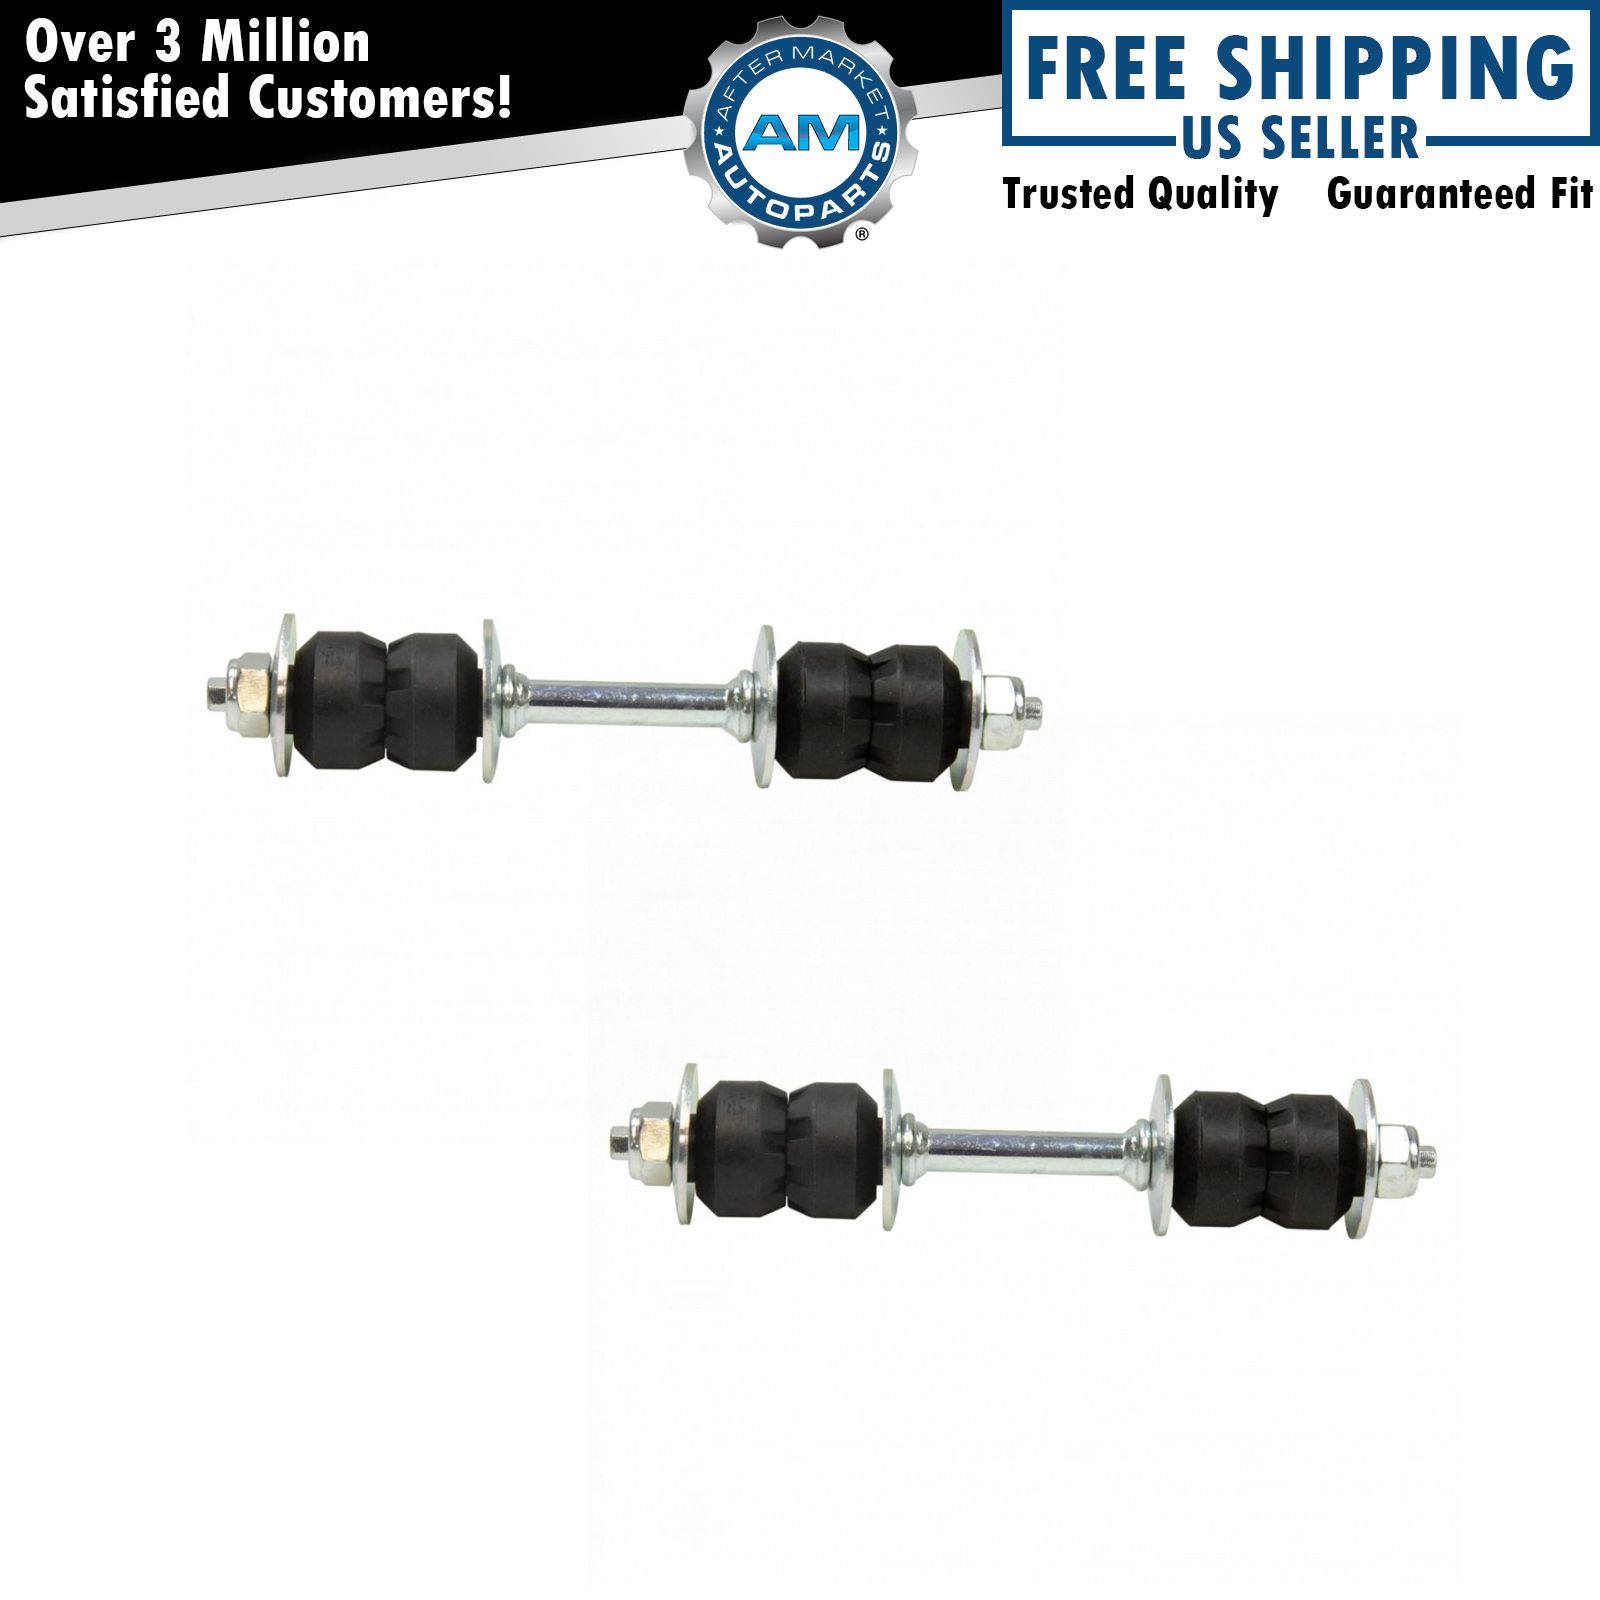 Front Sway Bar Link Kit Pair Set of 2 for Volvo 740 745 760 780 940 960